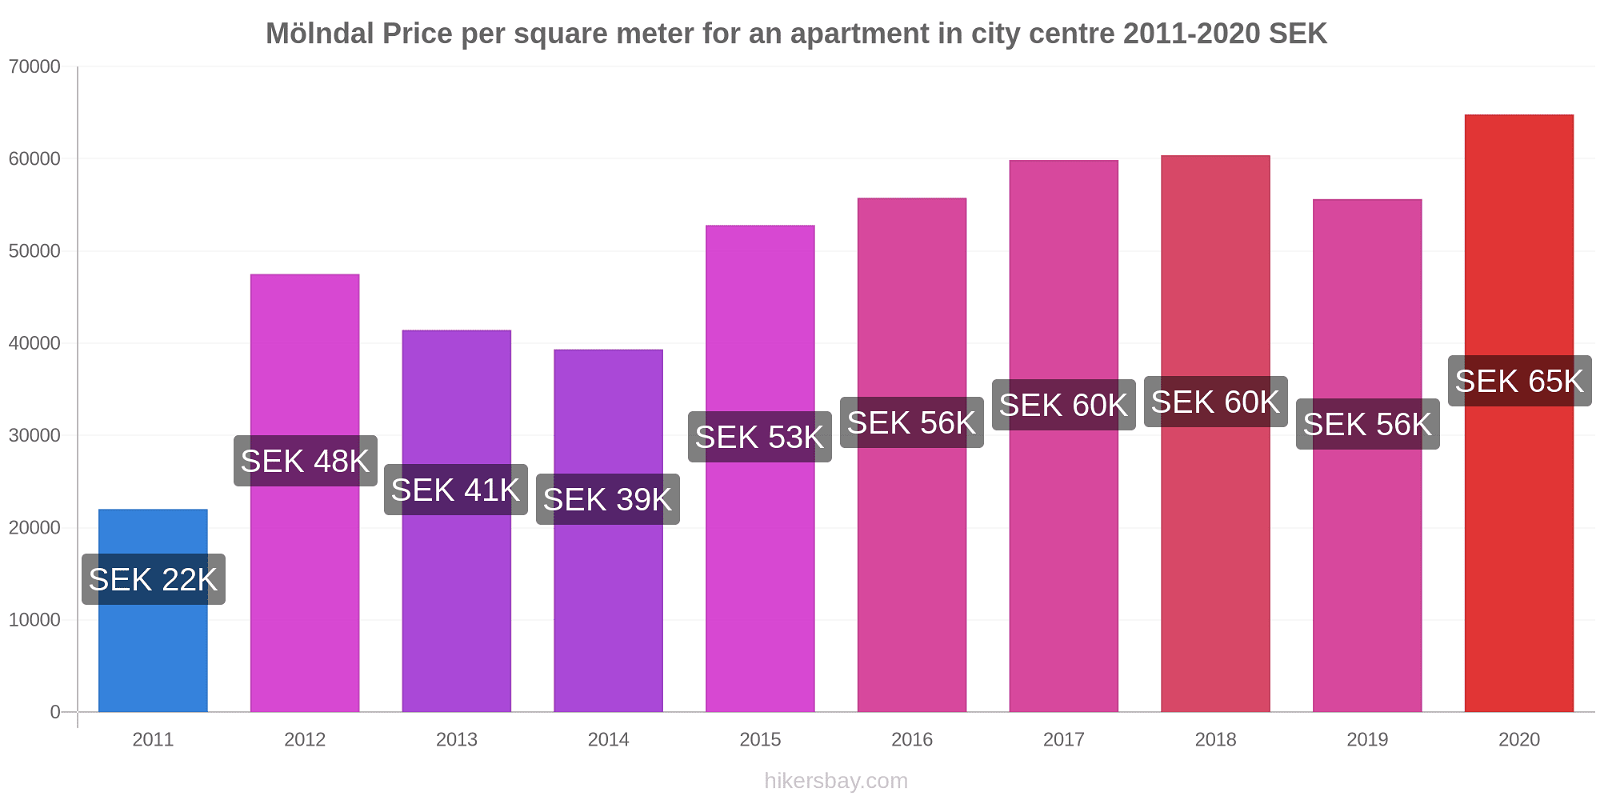 Mölndal price changes Price per square meter for an apartment in city centre hikersbay.com